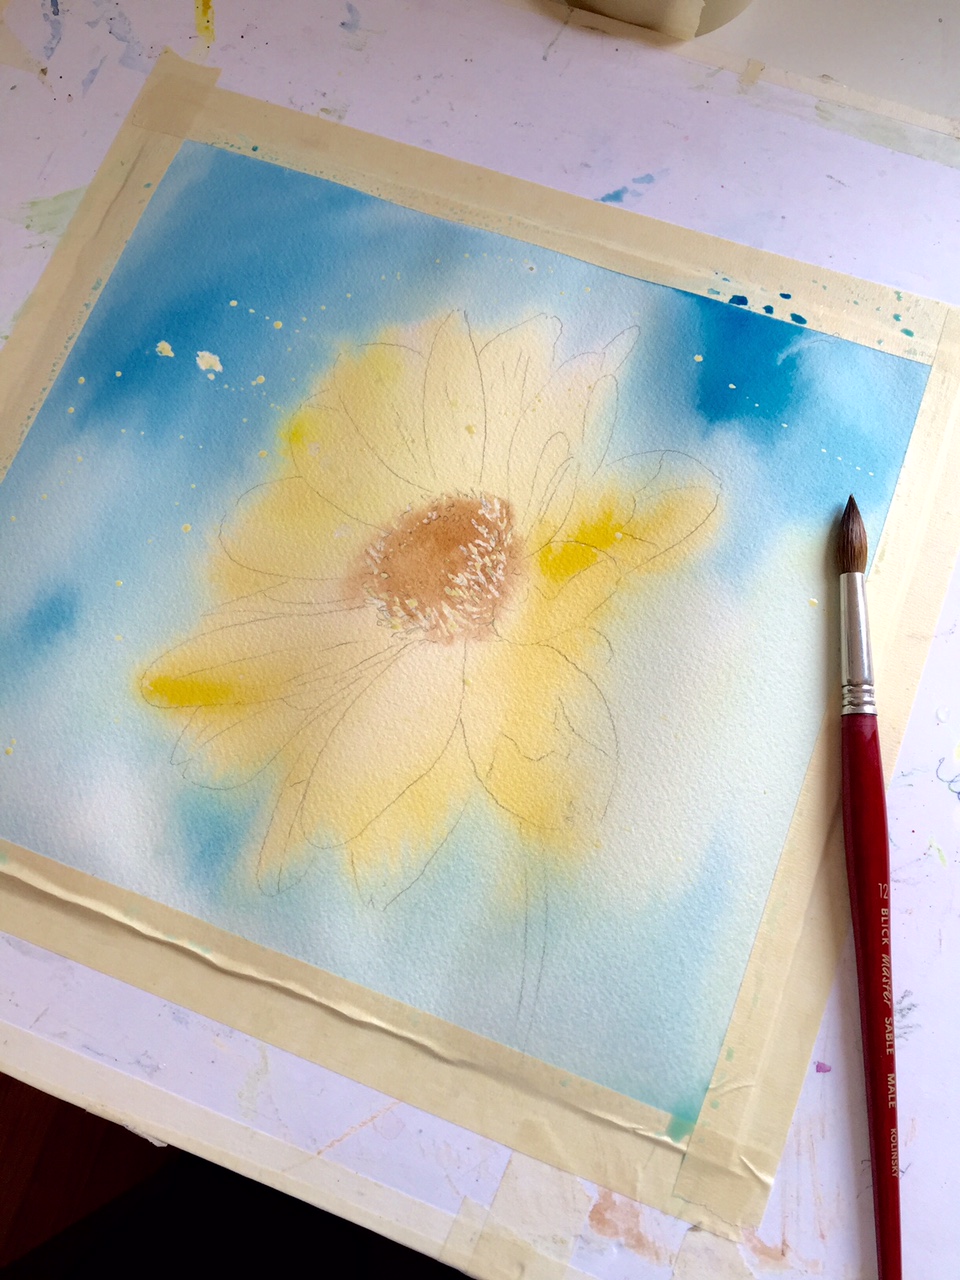 Watercolor first wash on flower